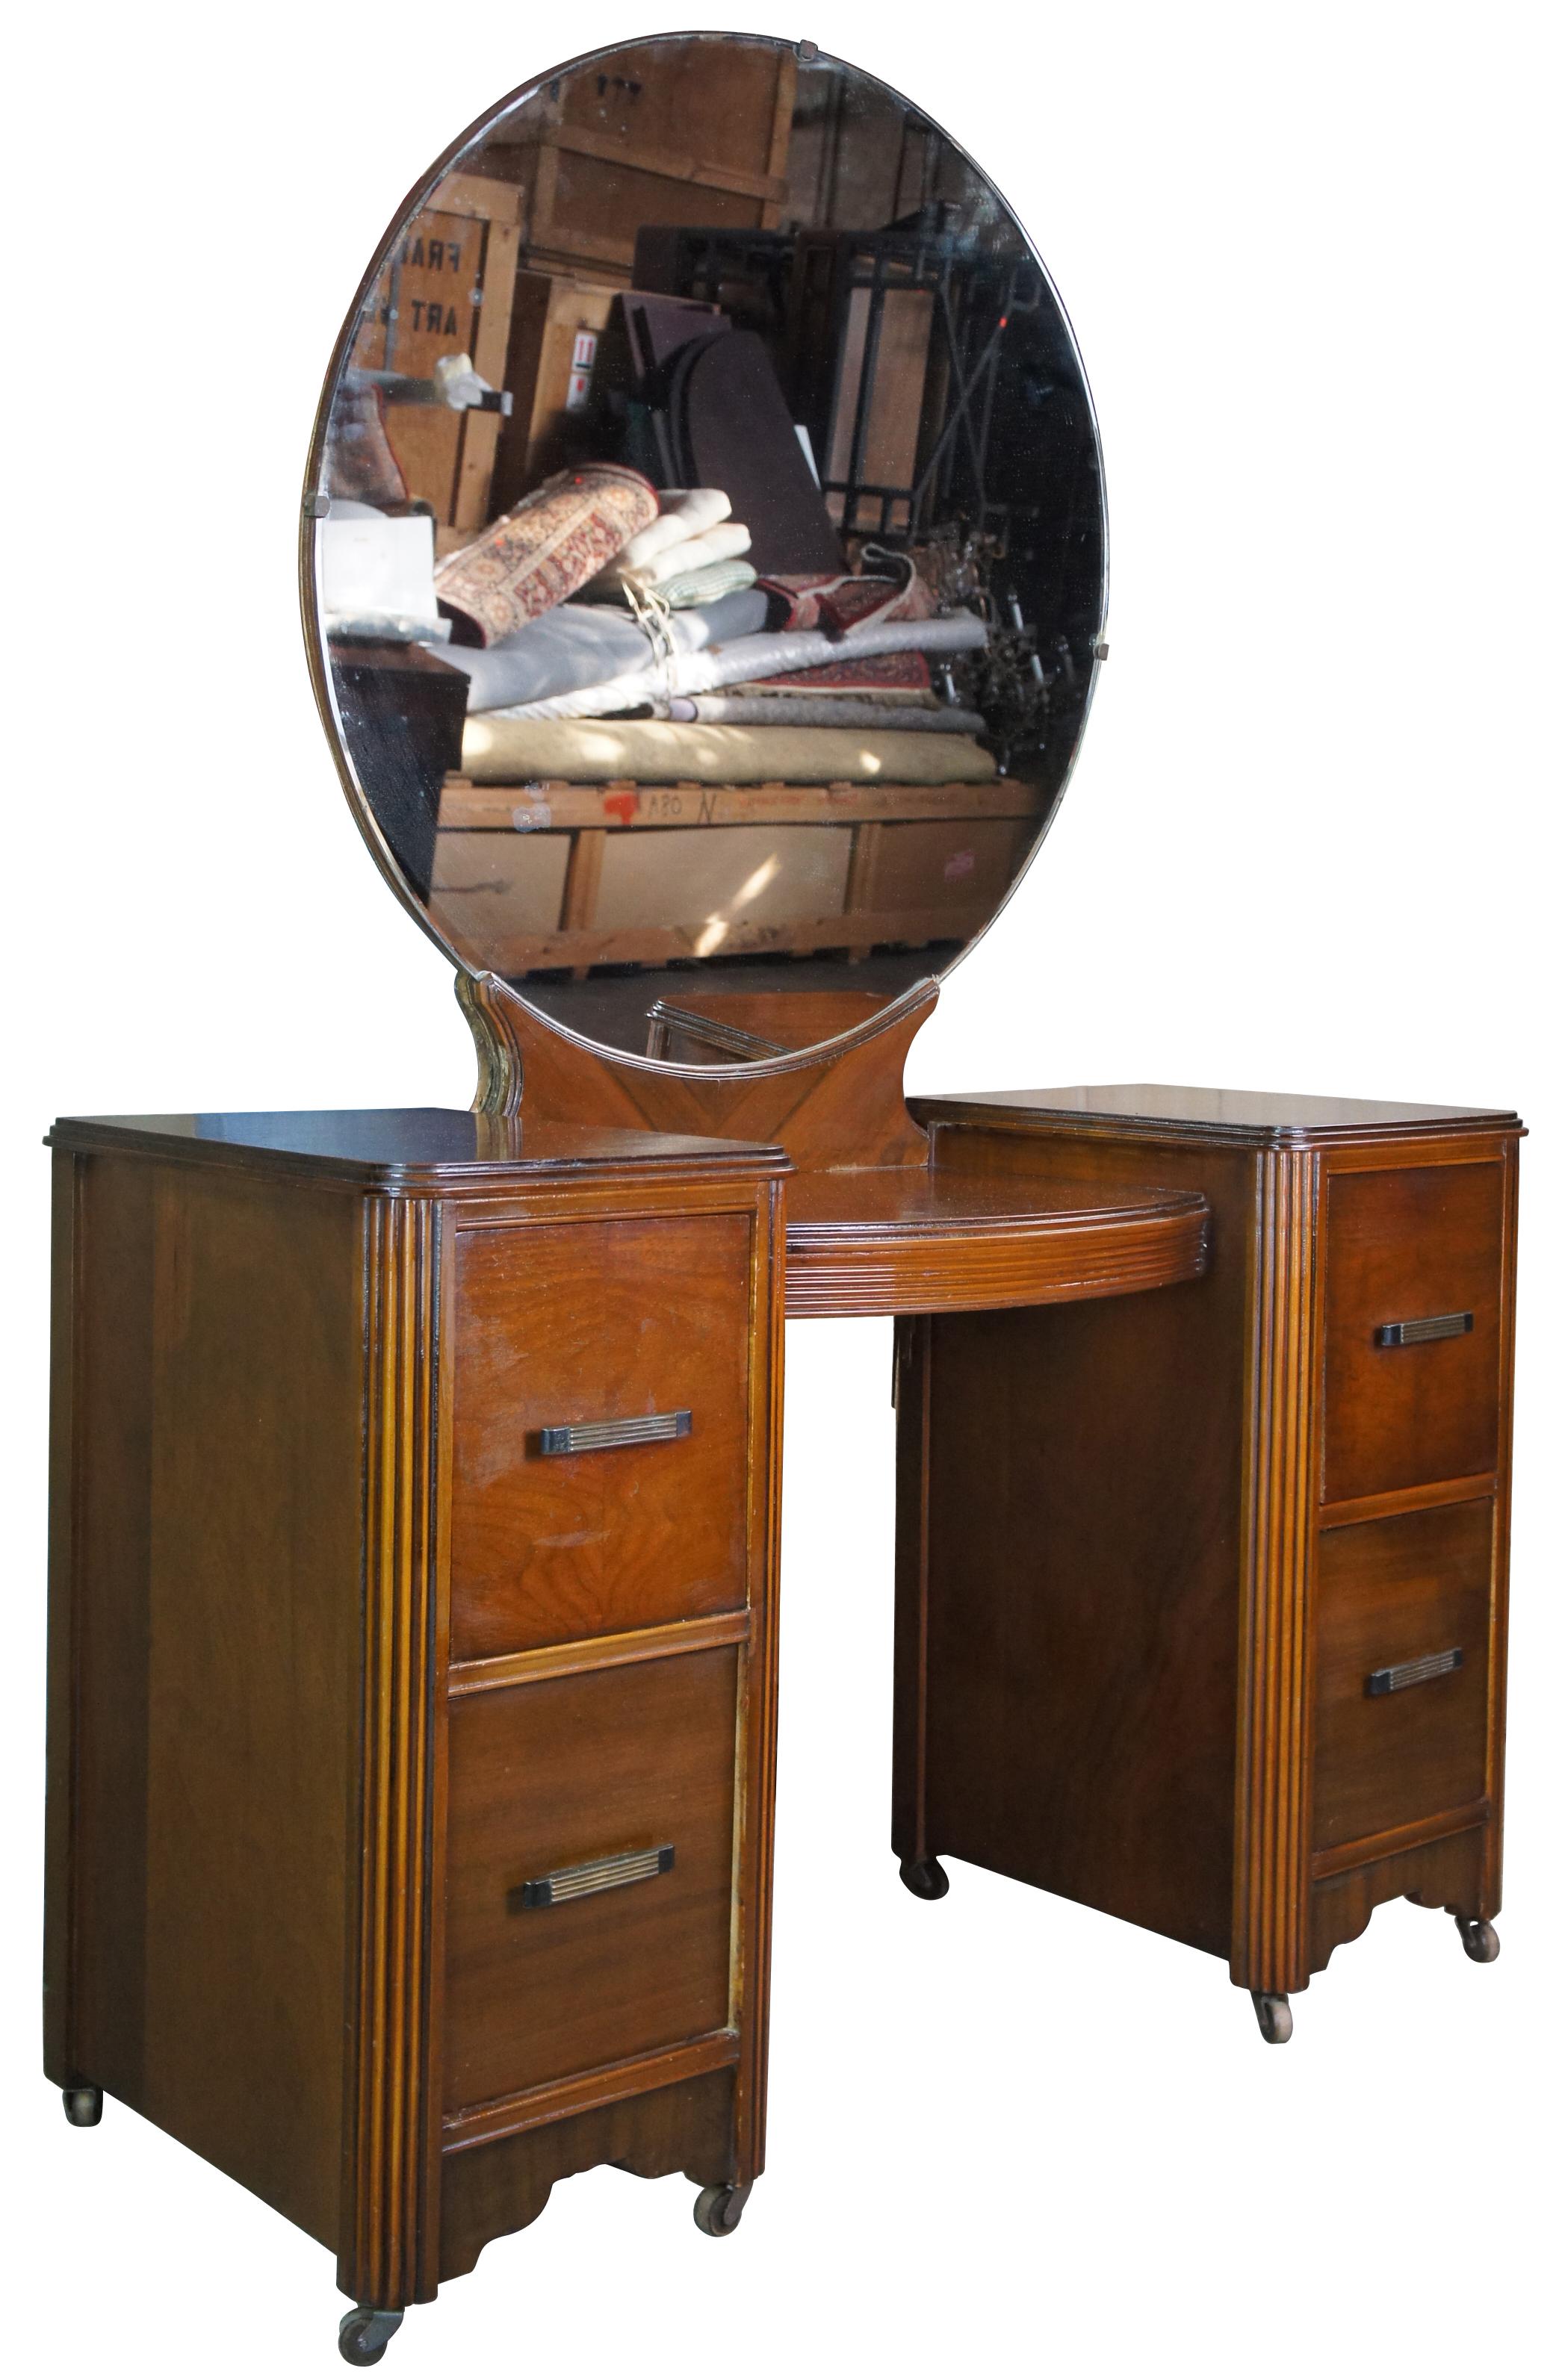 Antique Johnson Carper Furniture Co Art Deco vanity or dressing table. Made of walnut featuring Art Deco styling with fluting and large circular mirror. Produced by Johnson Carper out of Roanoke,Va. 

Measures: 18